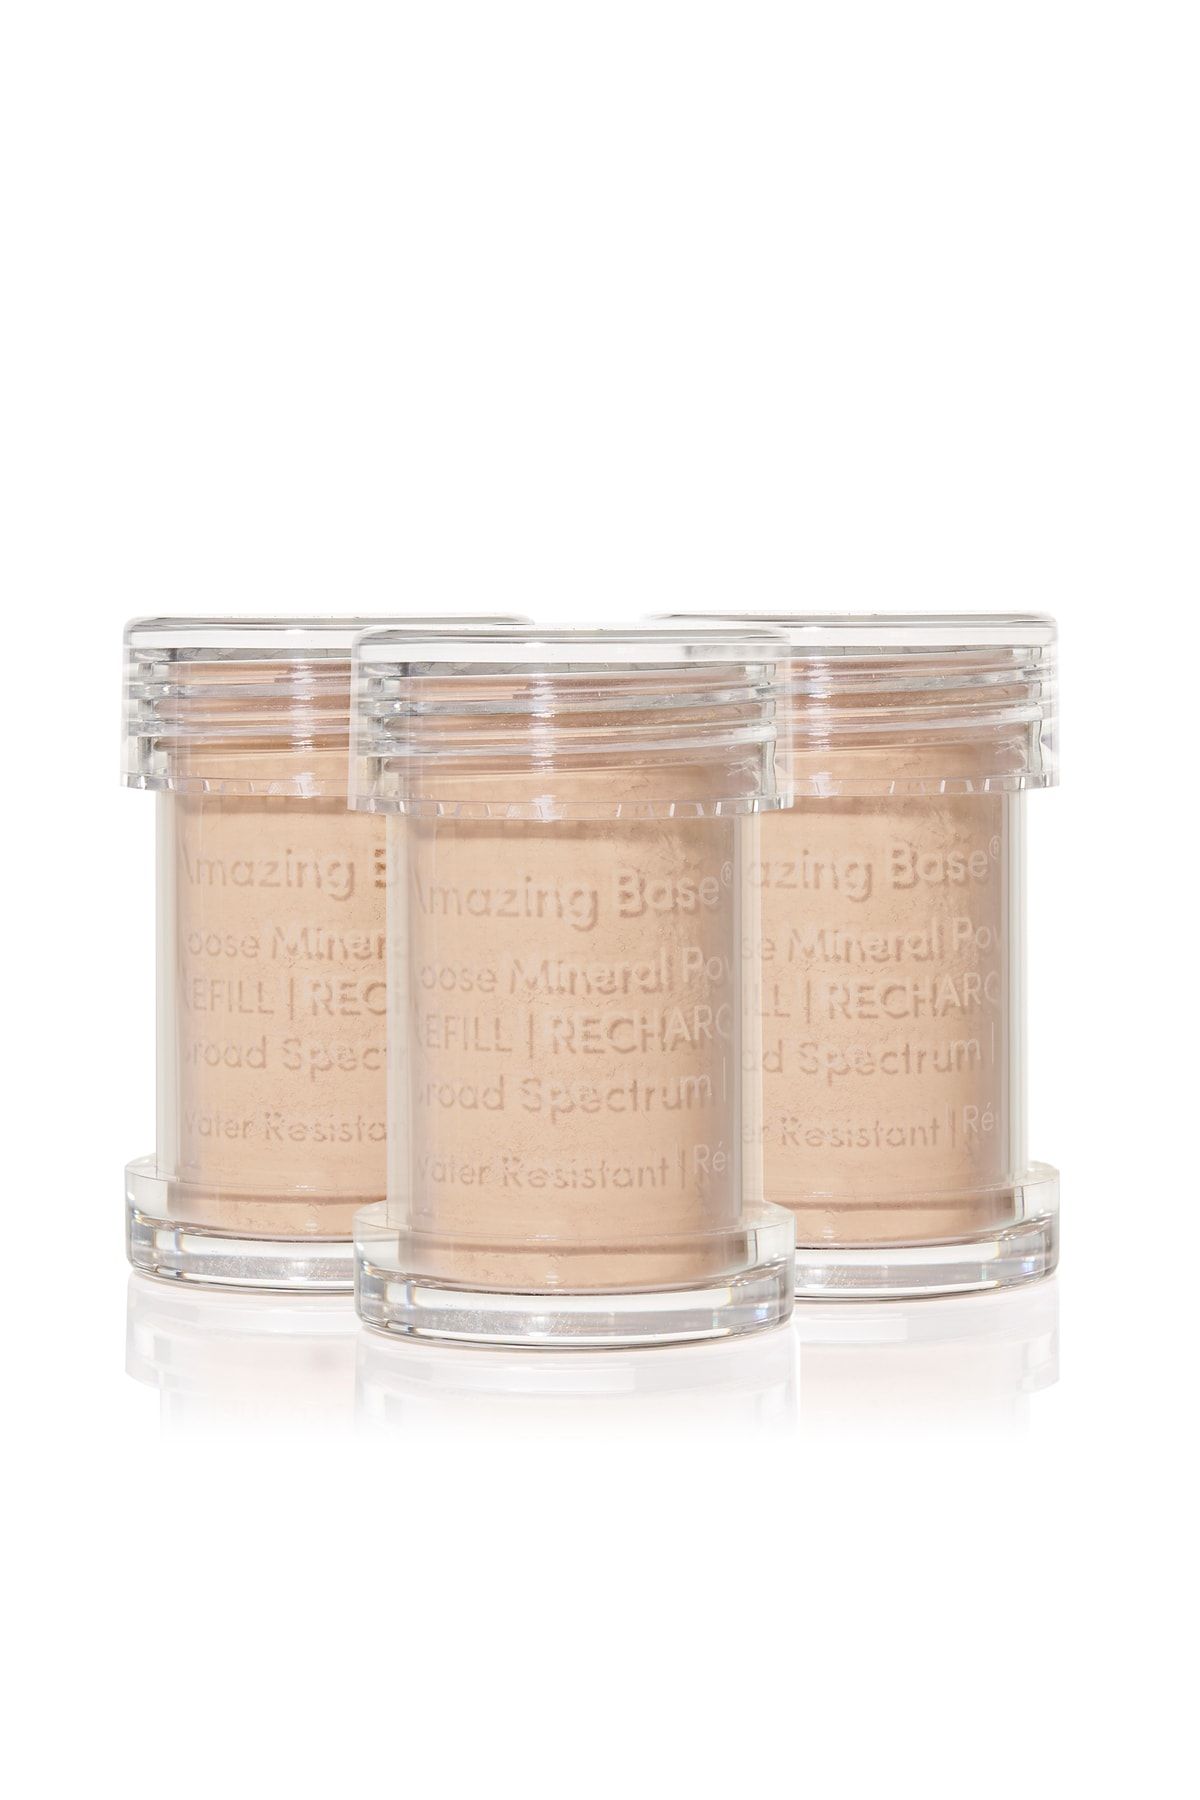 Jane Iredale Amazing Base® Loose Mineral Powder Refill Spf20 #amber ( 3 Refills )